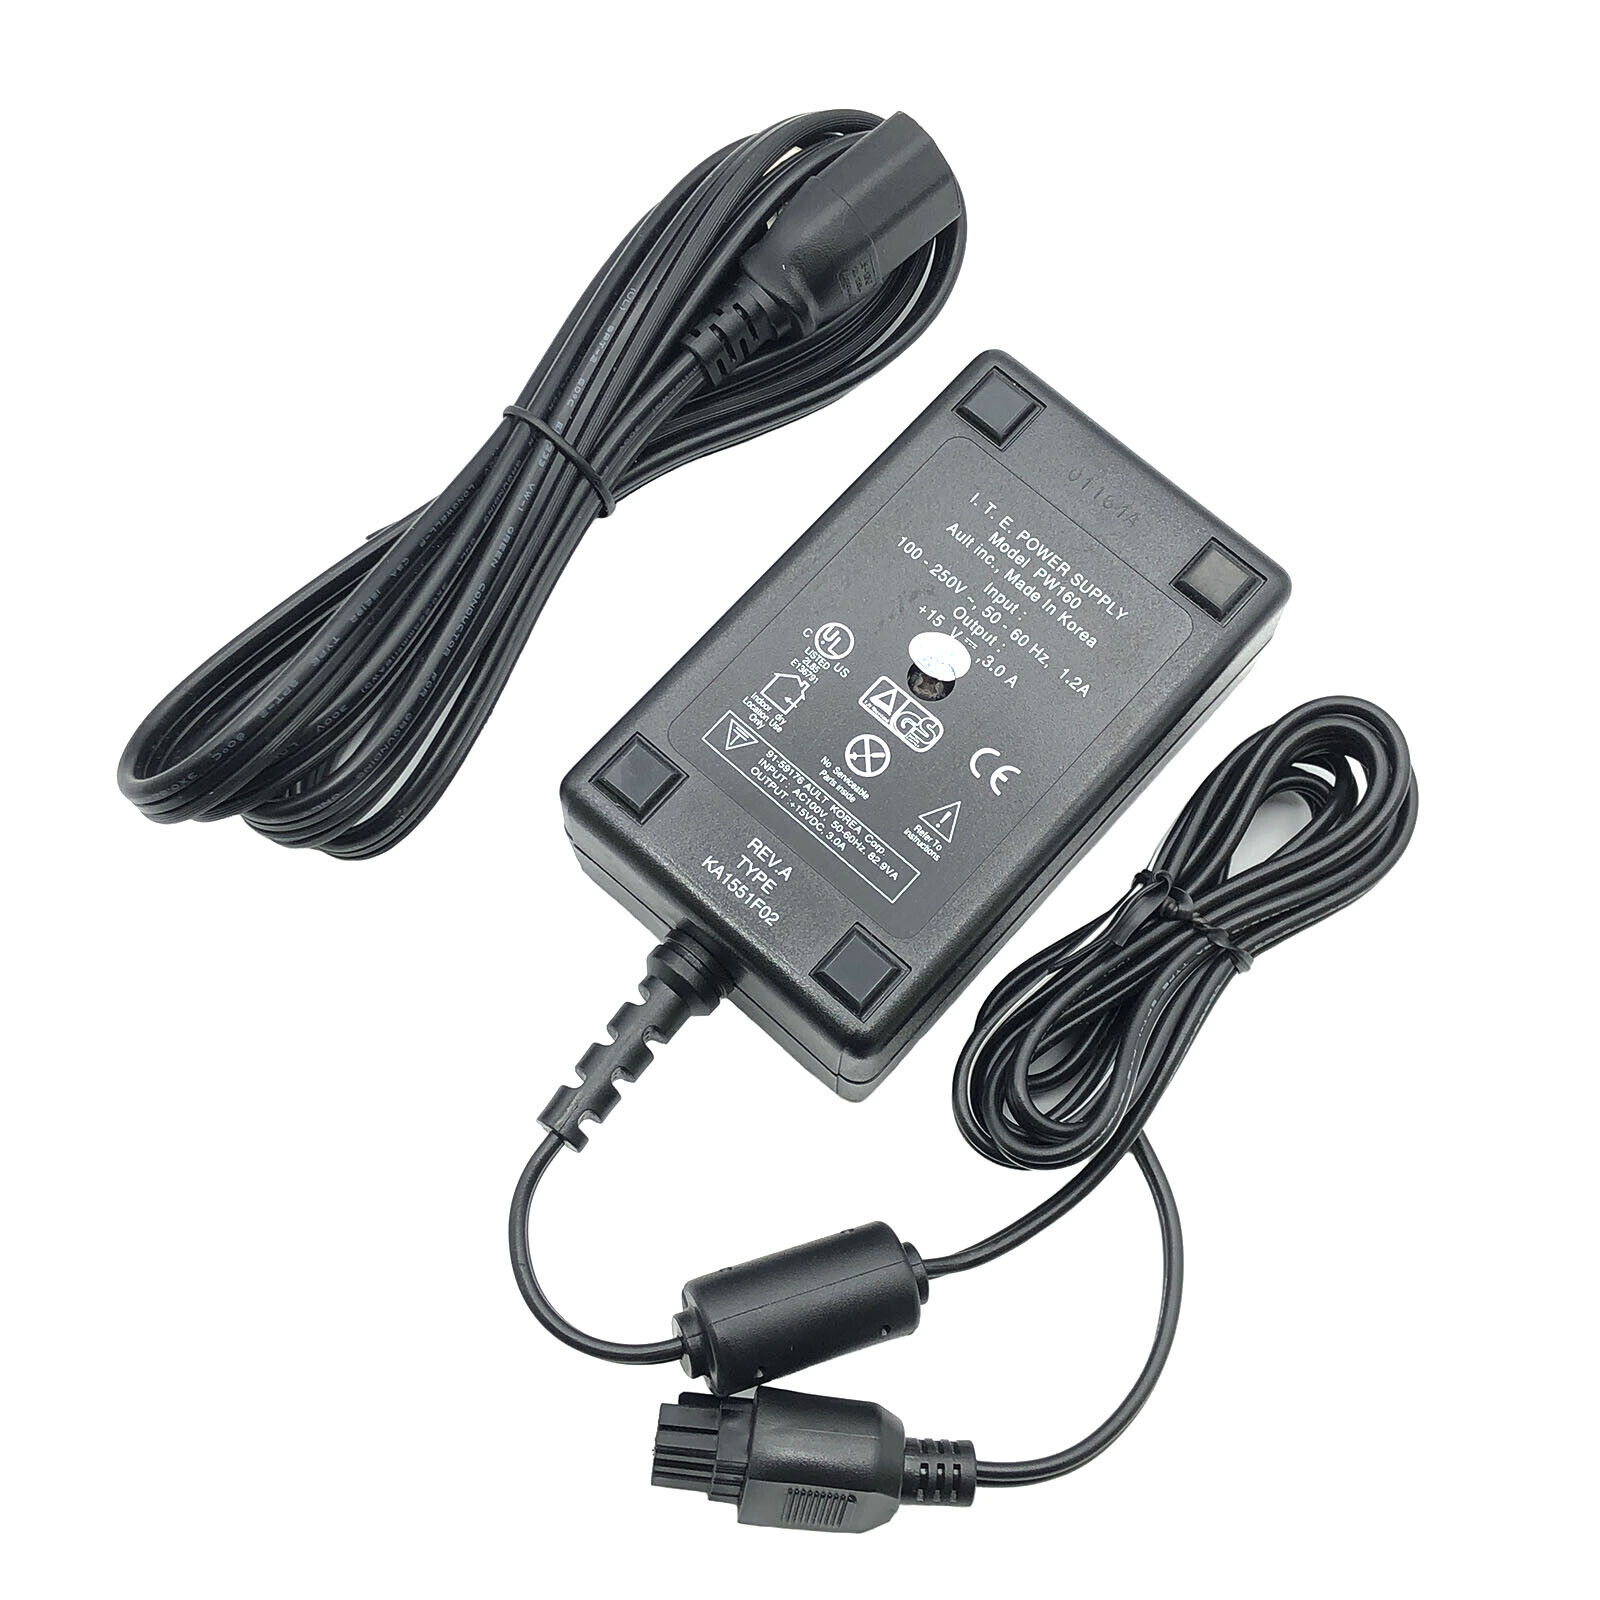 *Brand NEW* Genuine Ault 15V 3A PW160 6-Pin AC Adapter with Cord Power Supply